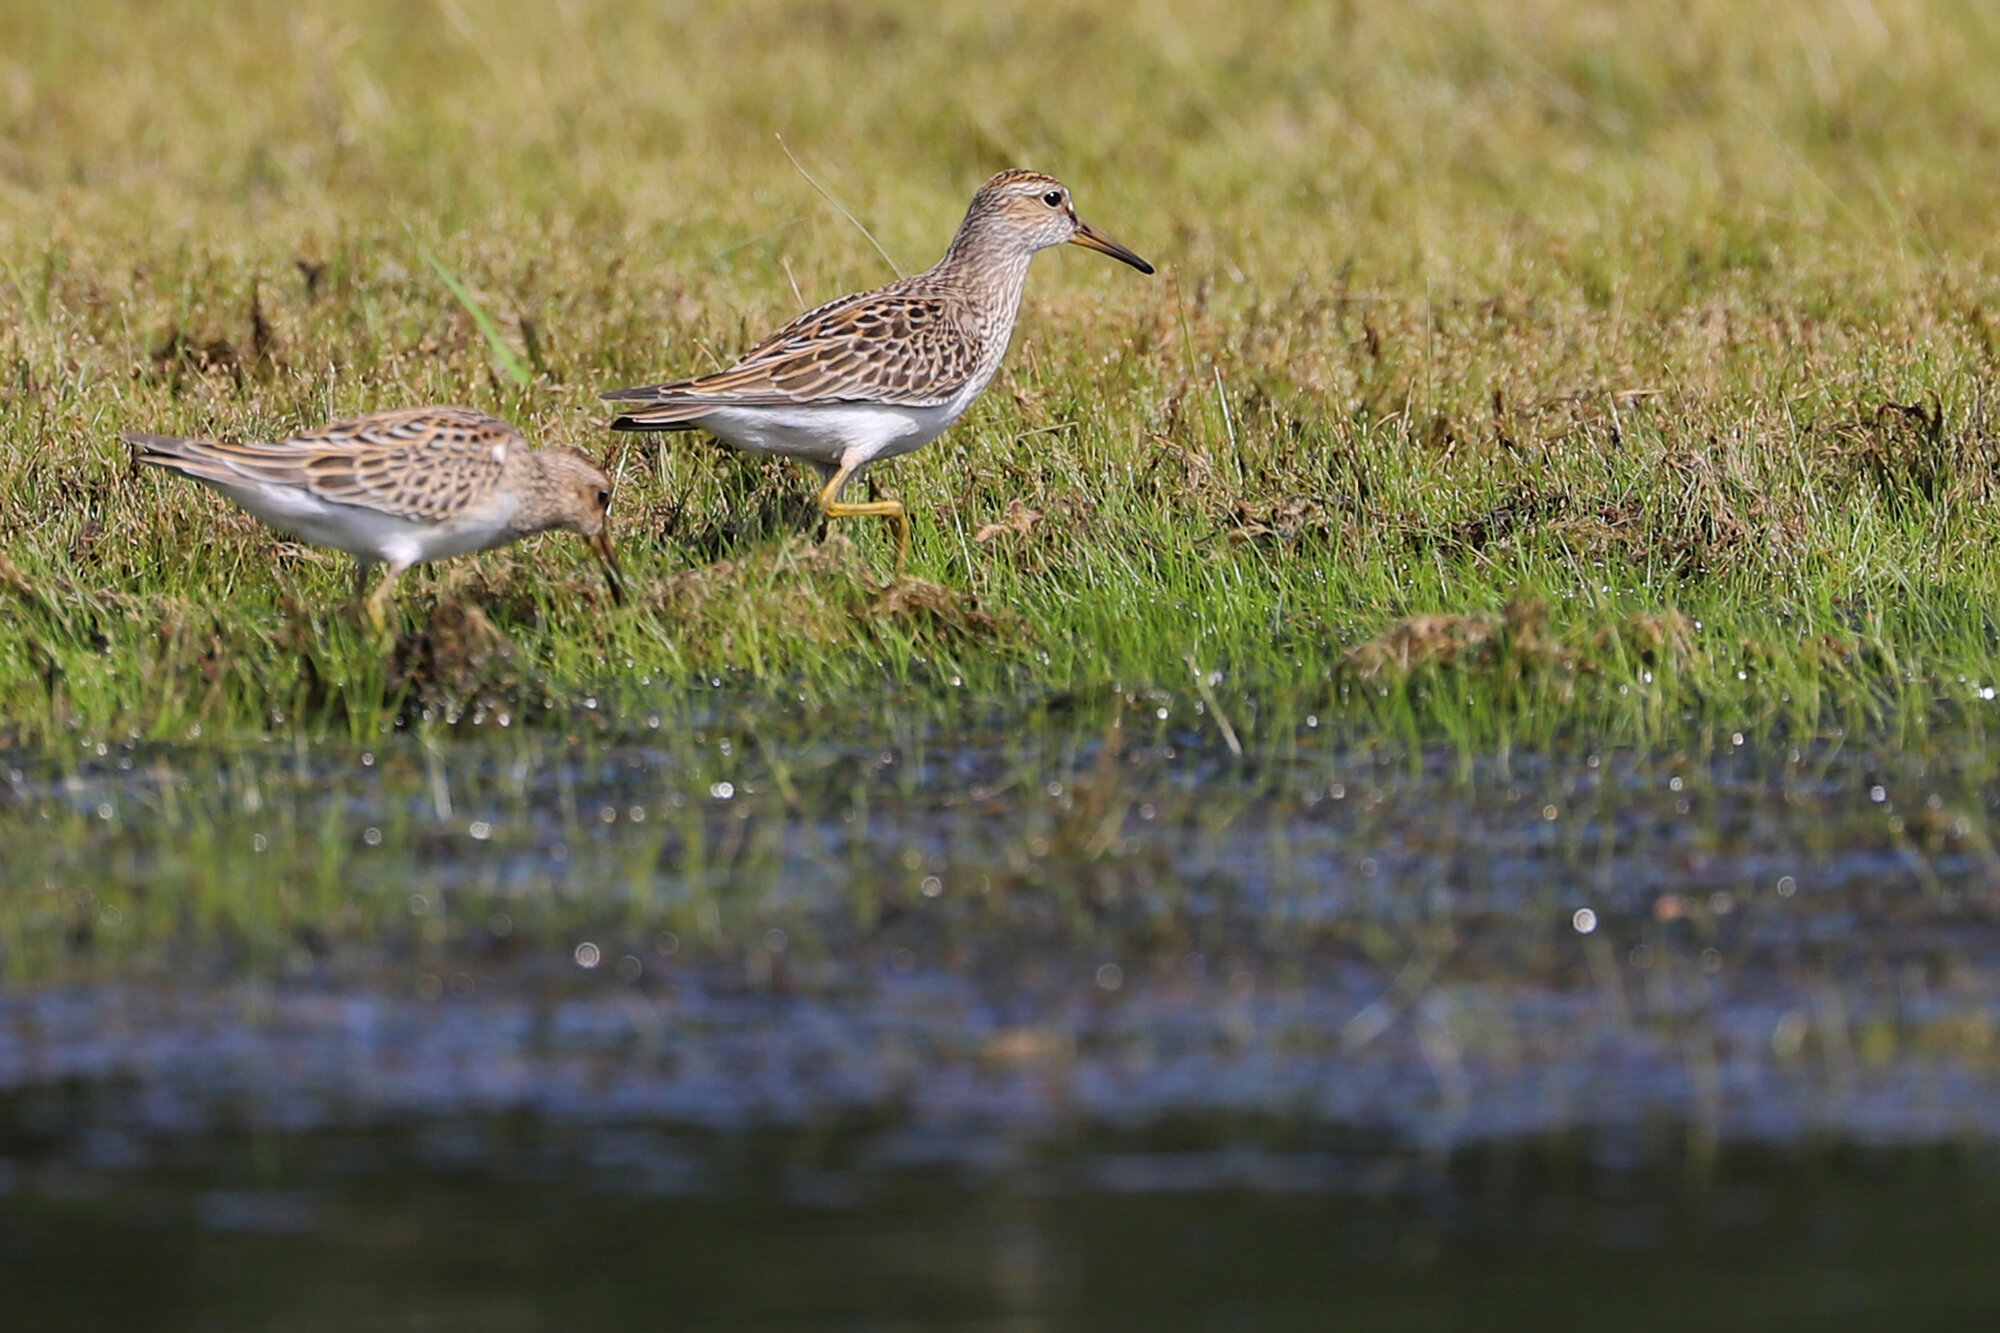  Pectoral Sandpipers / Princess Anne WMA Whitehurst Tract / 1 Sep 